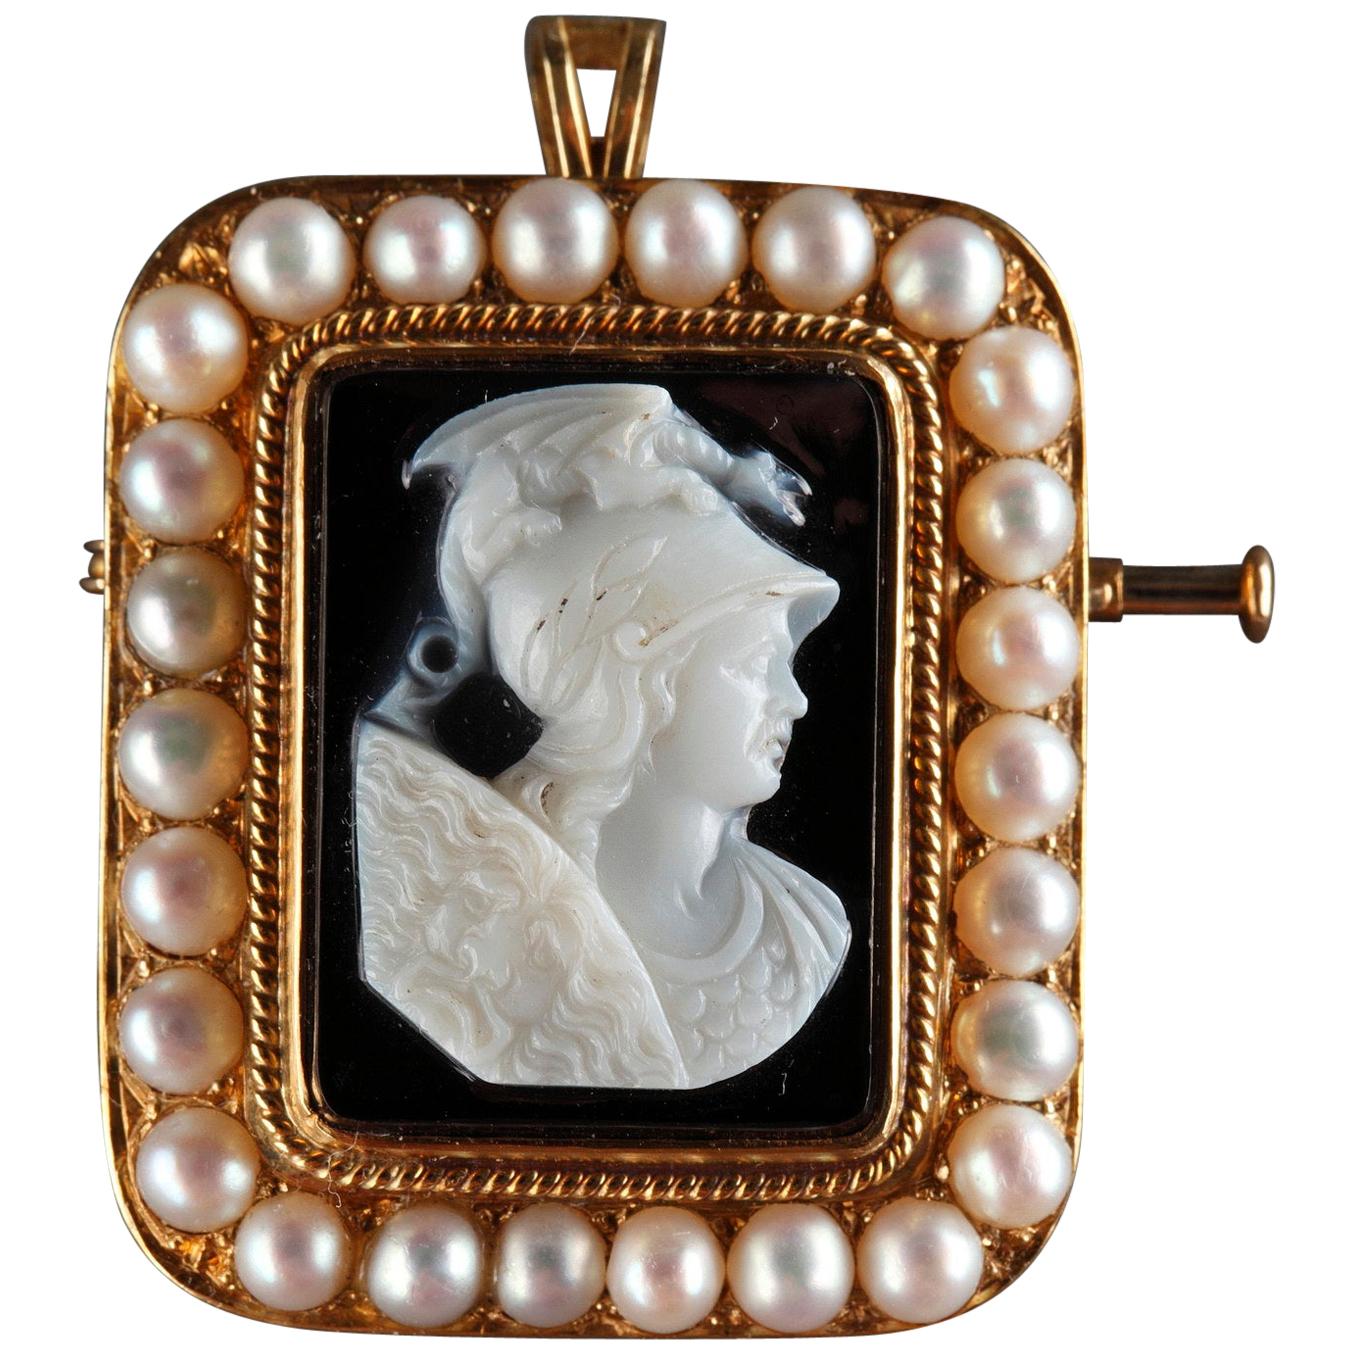 Cameo on Agate Featuring Perseus, 19th Century